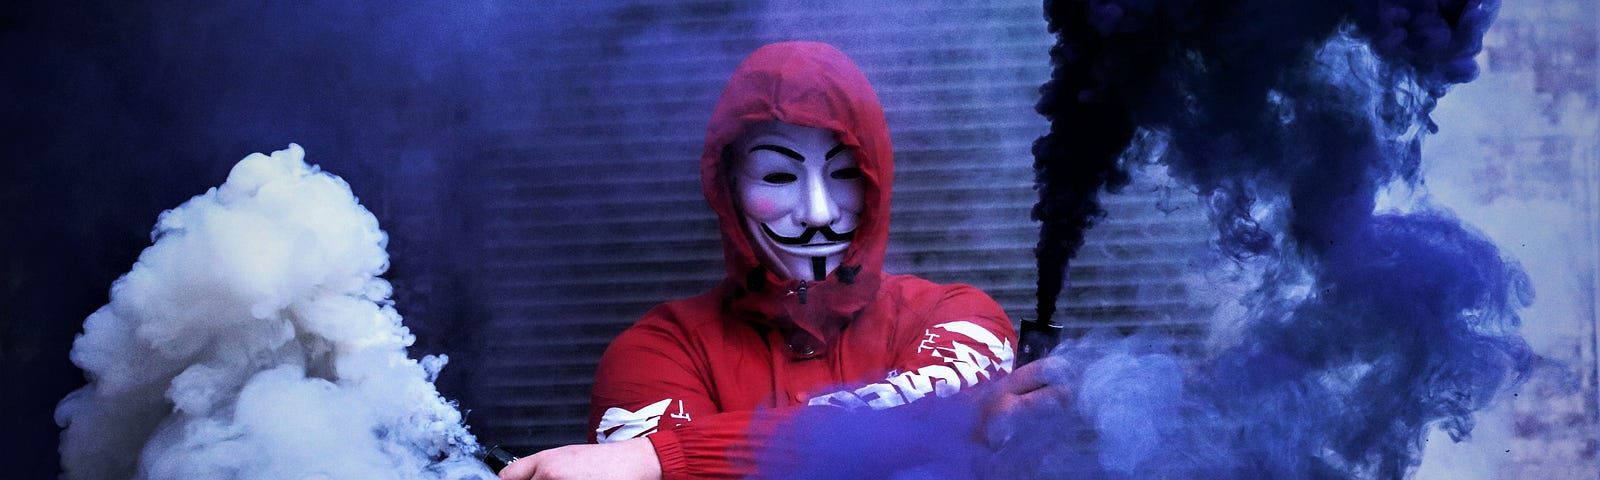 person in red hooded sweatshirt wearing mask and waving blue smoke flares